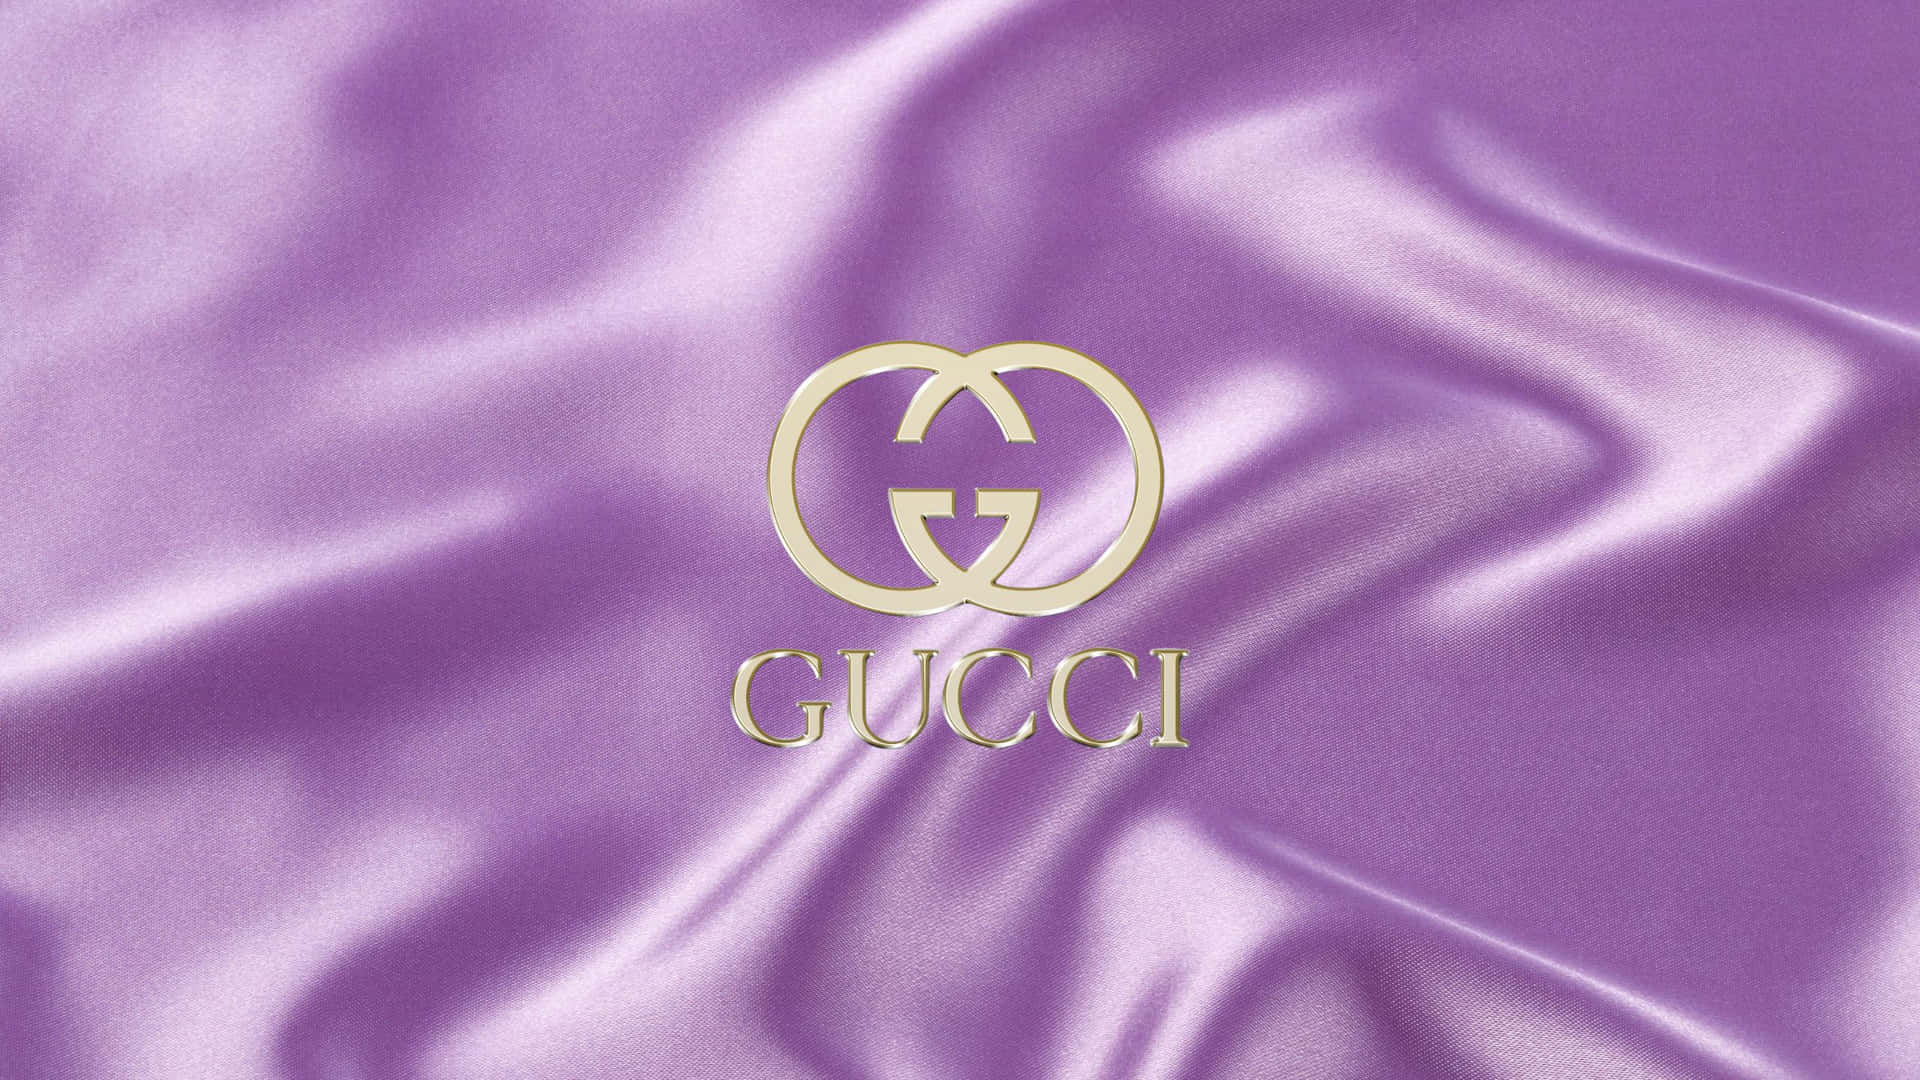 Gucci Pink wallpaper by Xwalls  Download on ZEDGE  d3e0